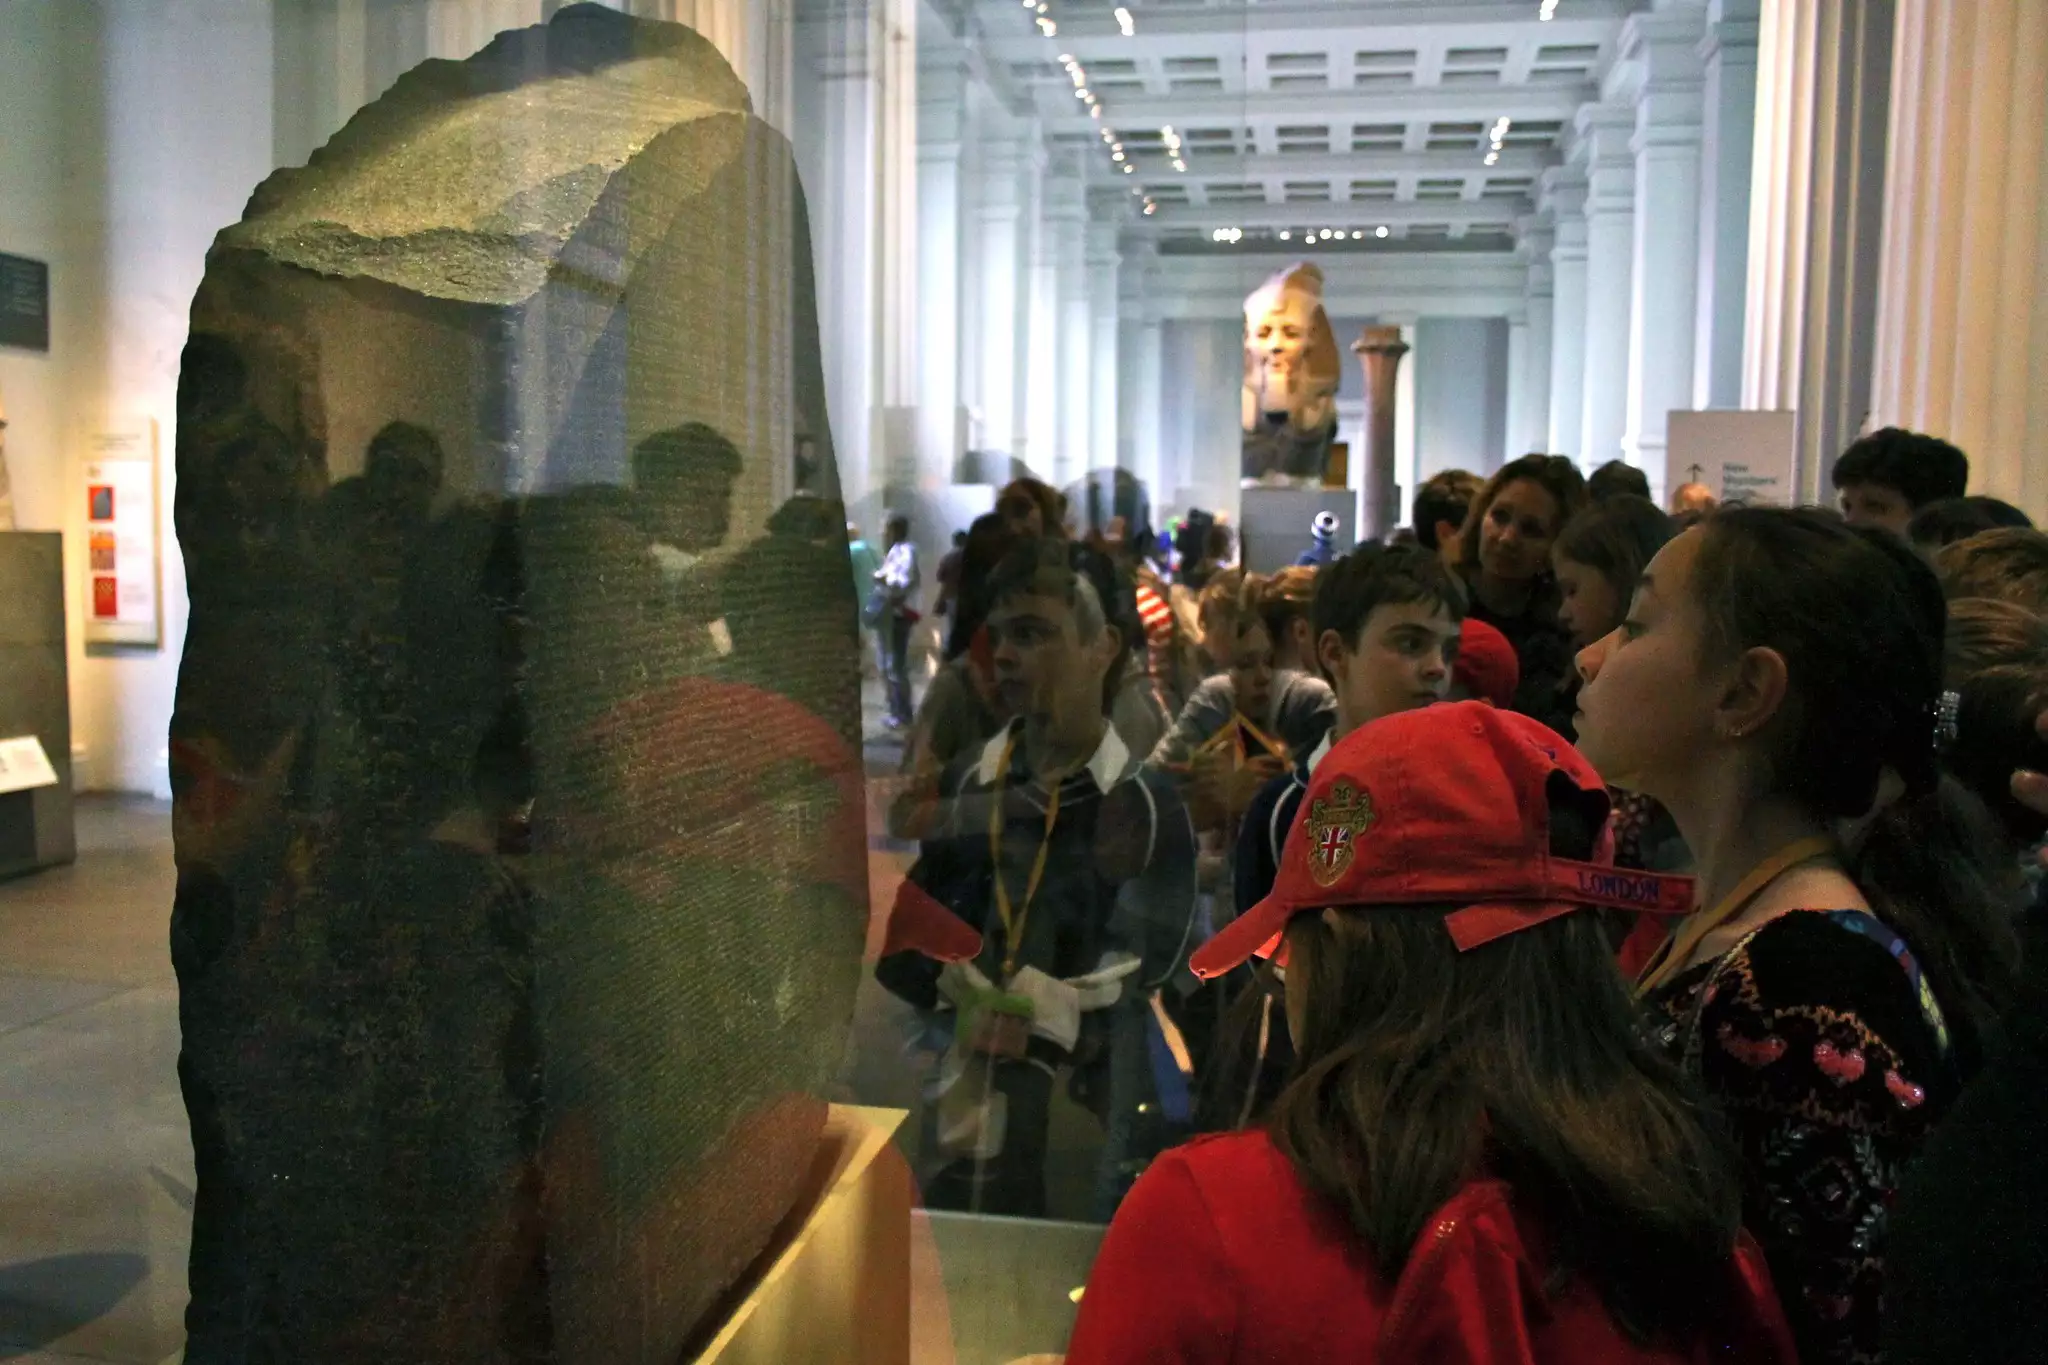 Schoolchildren gather around a display case featuring a stone slab covered in engravings